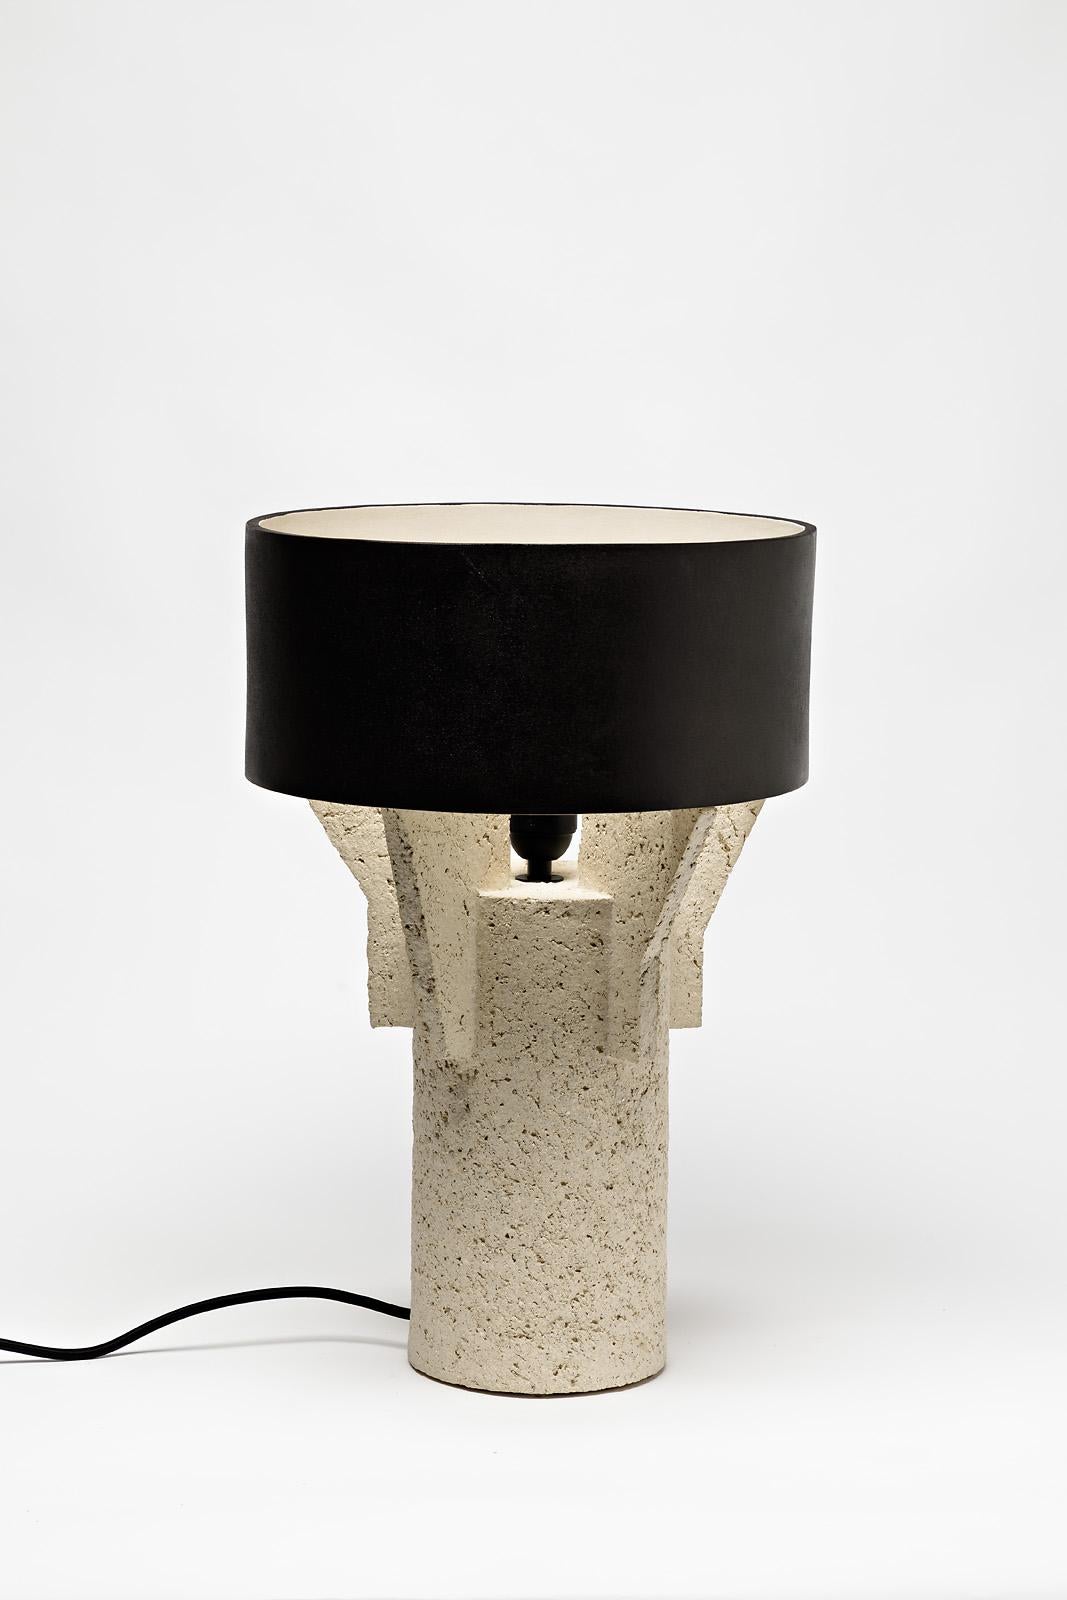 French Pair of Ceramic Table Lamps by Denis Castaing with Brown Glaze, 2019